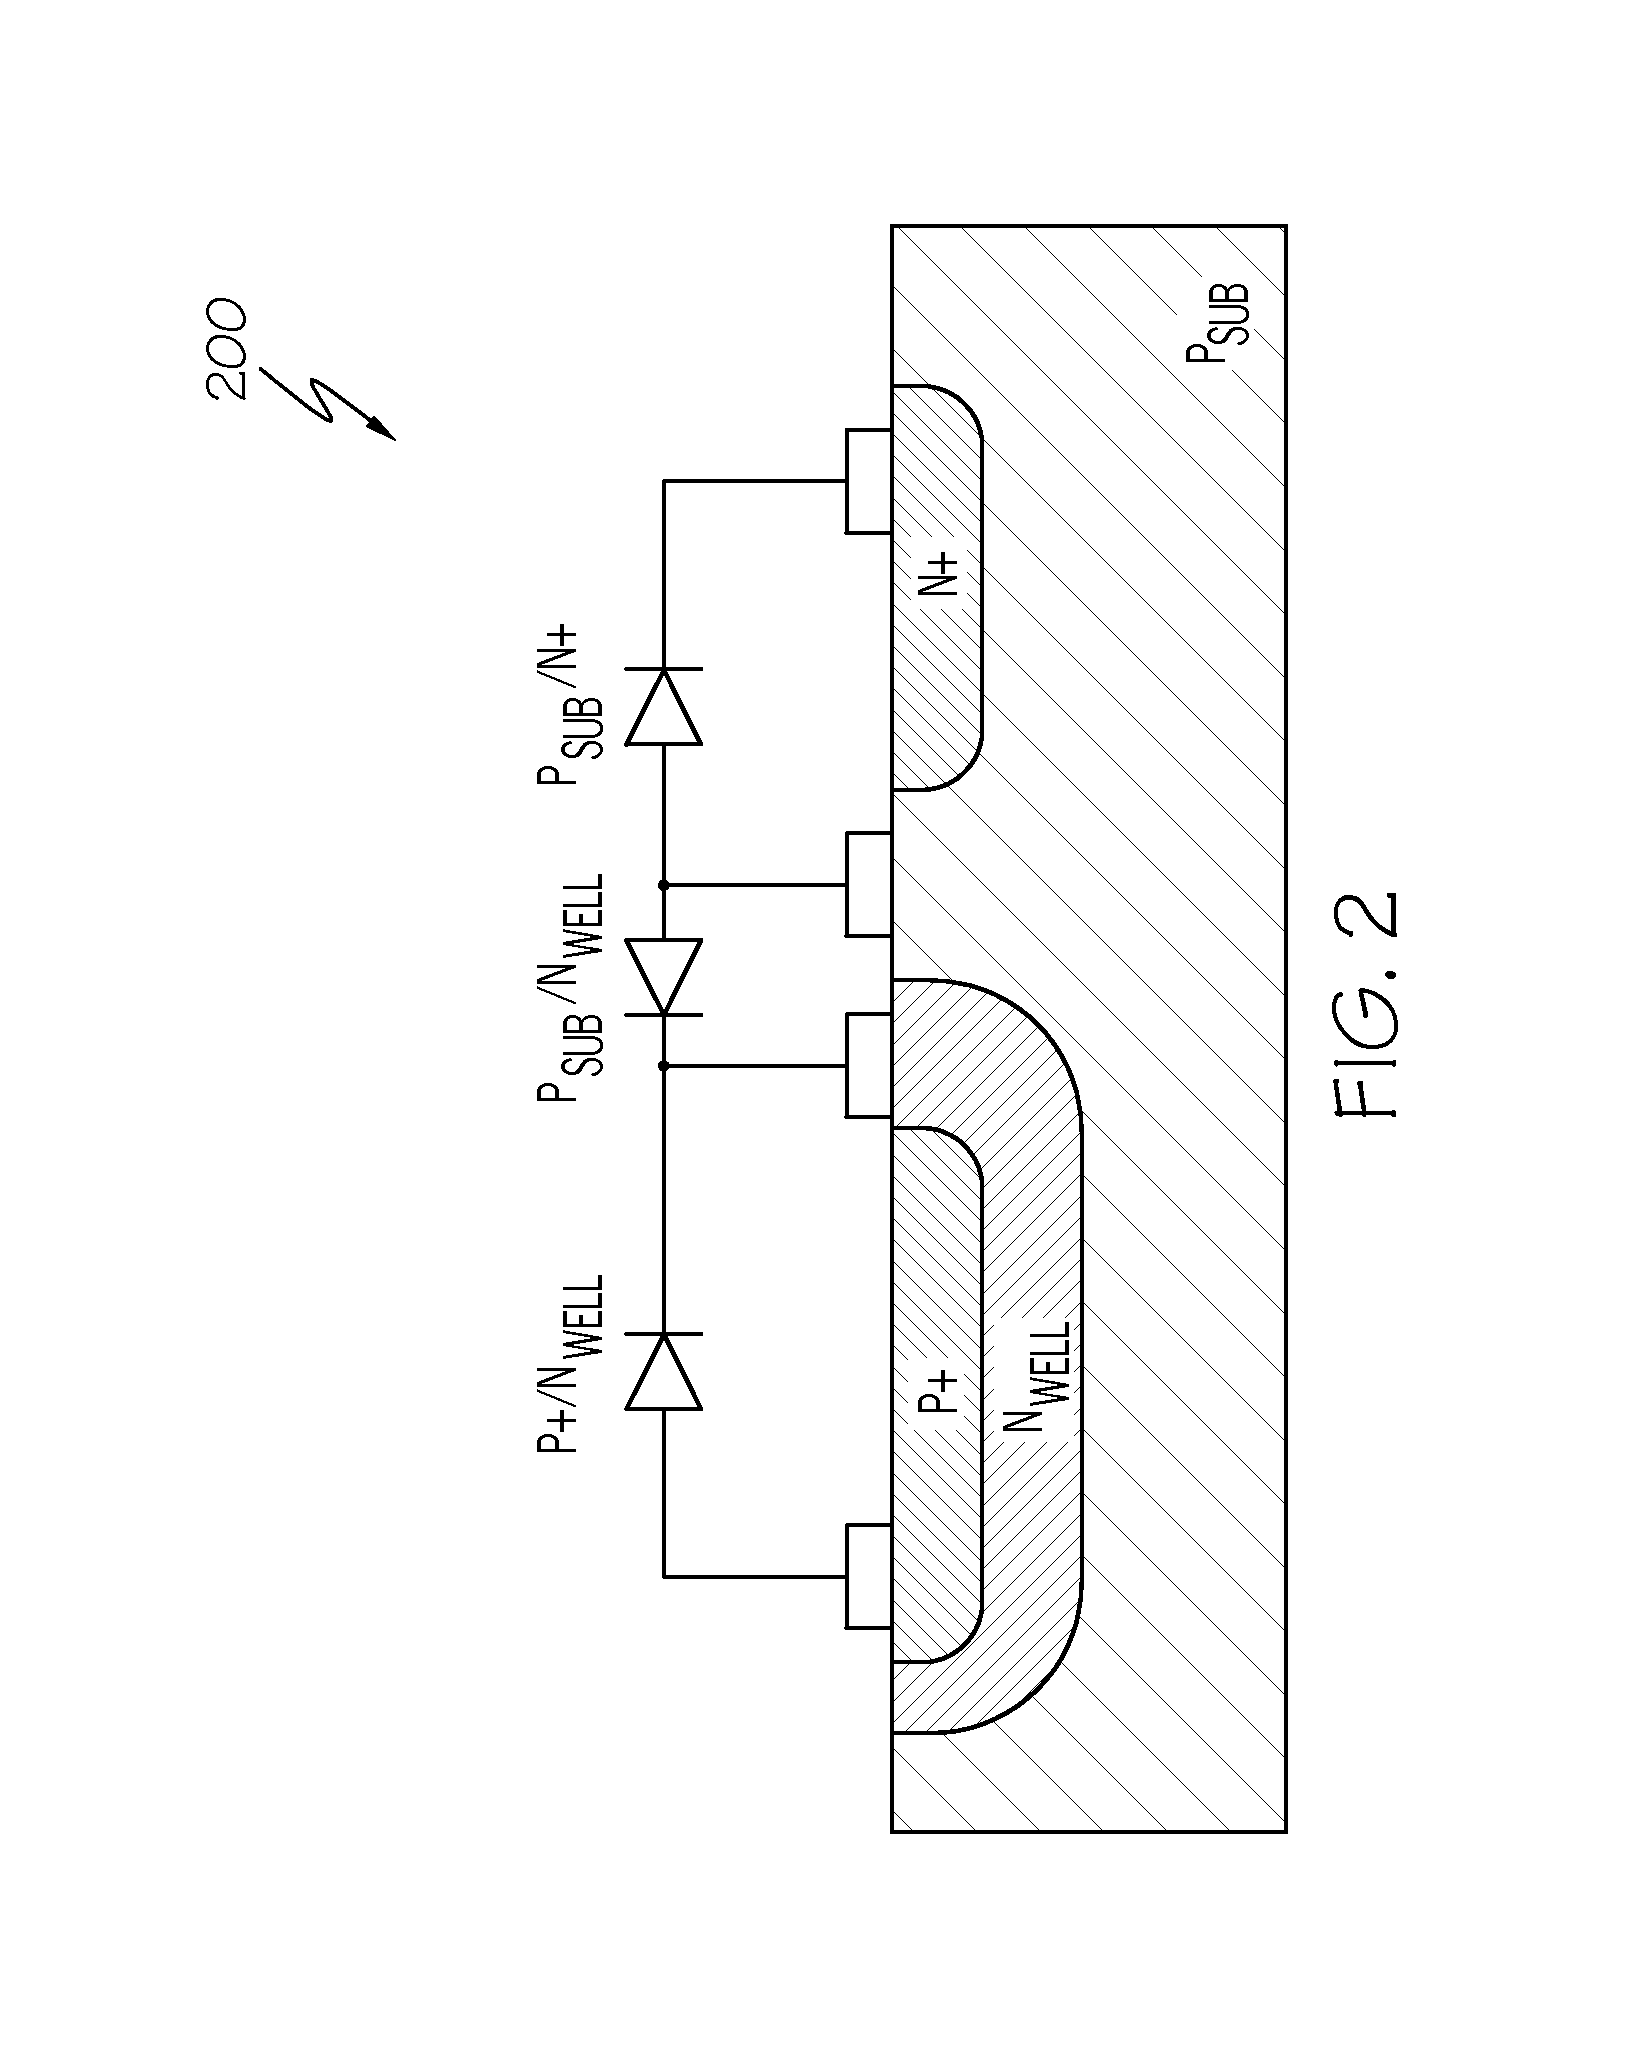 Integrated optical biosensor array including charge injection circuit and quantizer circuit